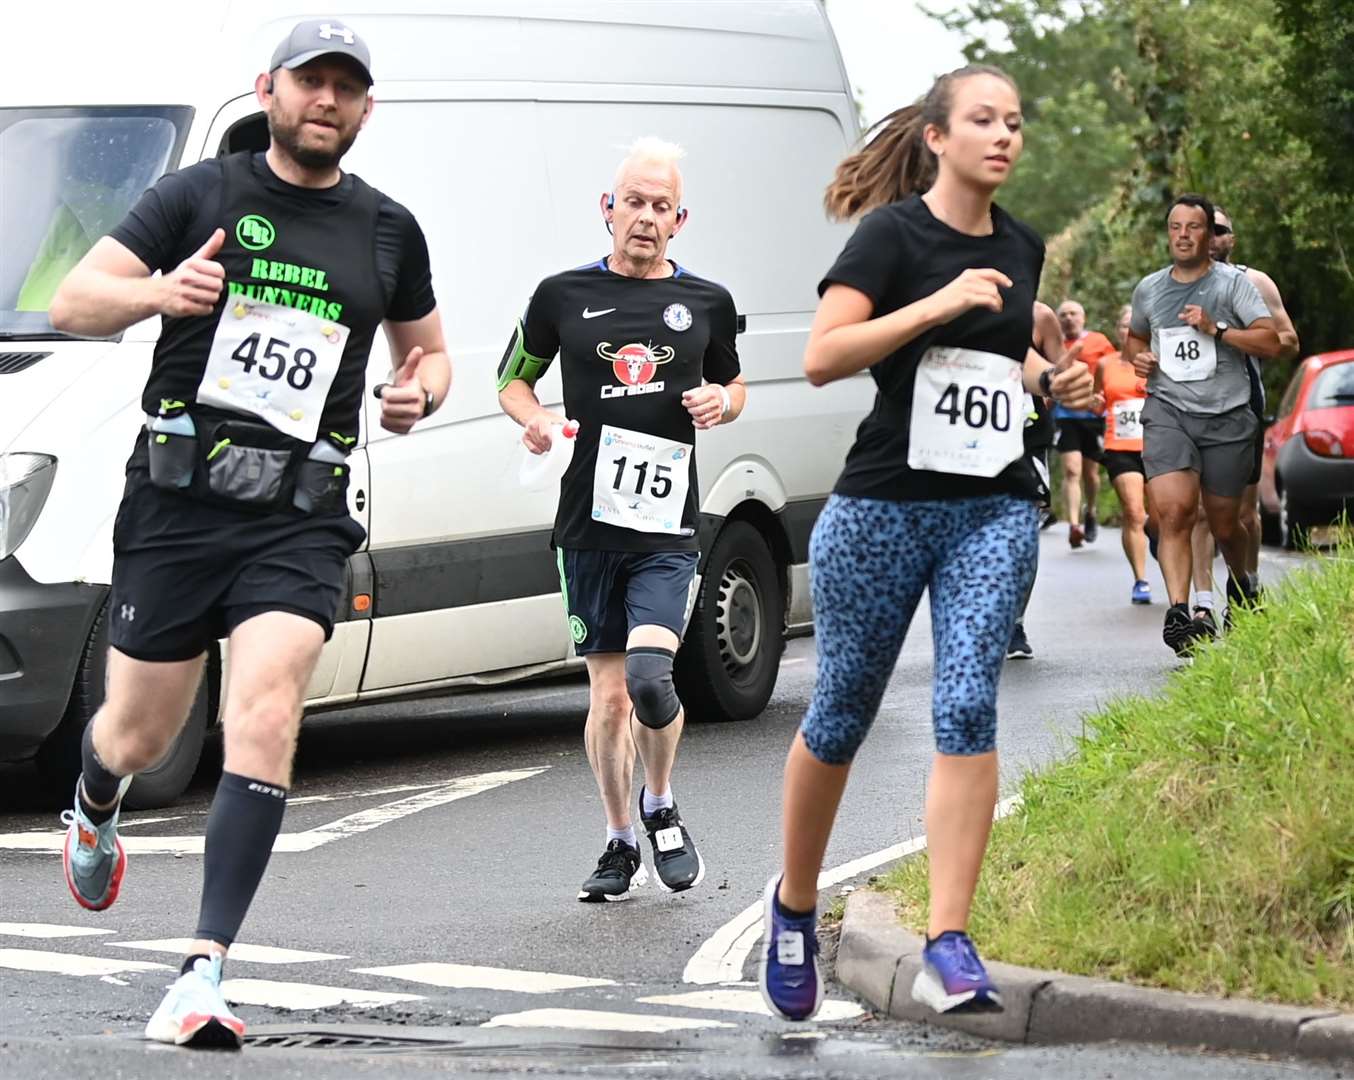 Shaun Wheeler (458) of Rebel Runners Medway and Hannah White (460). Picture: Barry Goodwin (49790400)